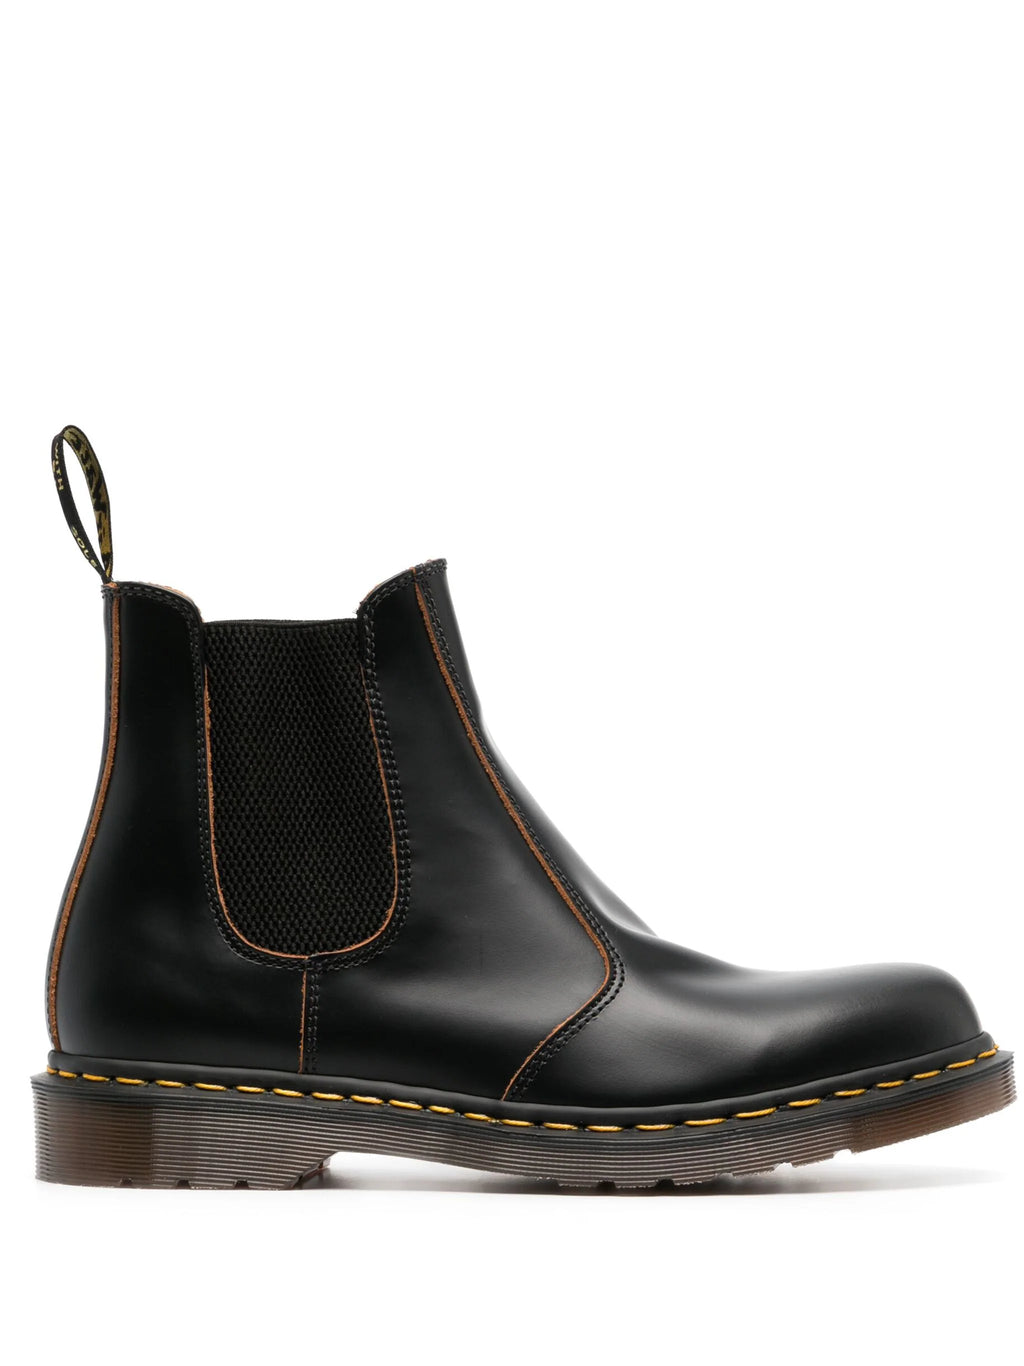 DR. MARTENS 2976 Vintage Made In England Chelsea Boots